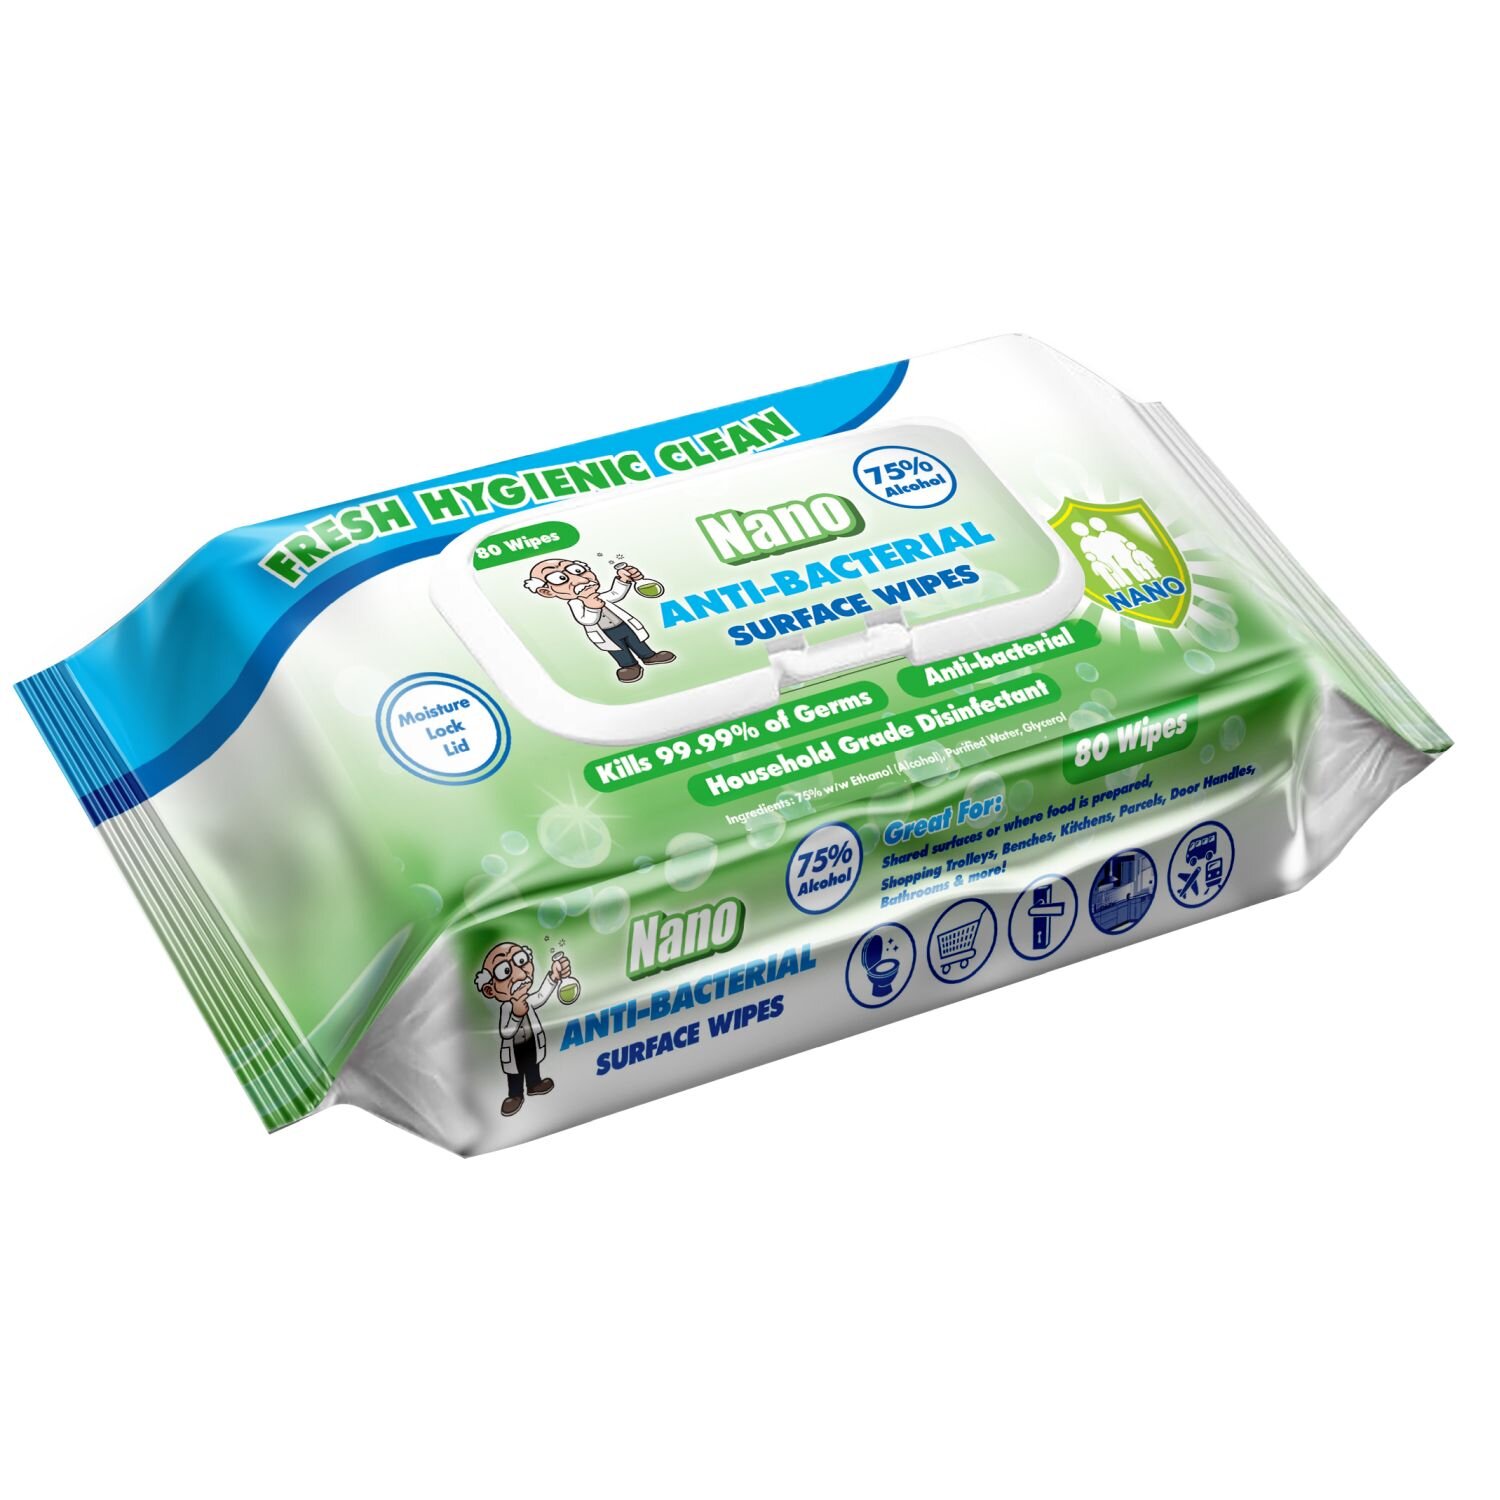 75% Alcohol Anti-Bacterical Surface Wipes Pkt 80